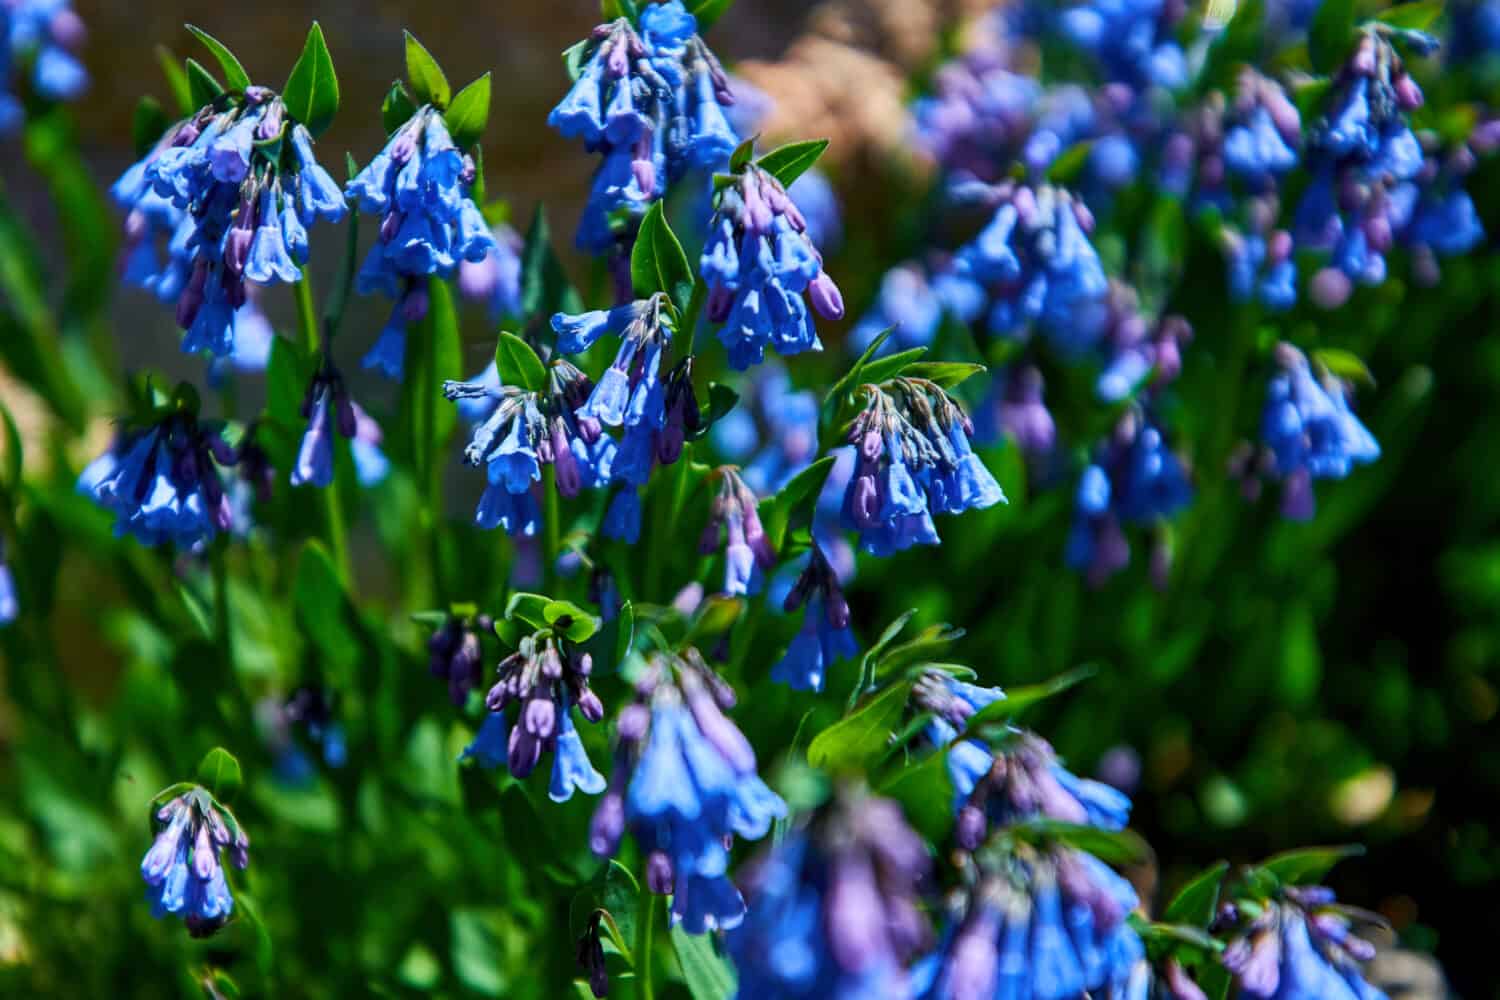 Mertensia ciliata Mountain bluebells Tall fringed bluebells, purple and blue bells at 11000 ft in the Rocky Mountains, Colorado